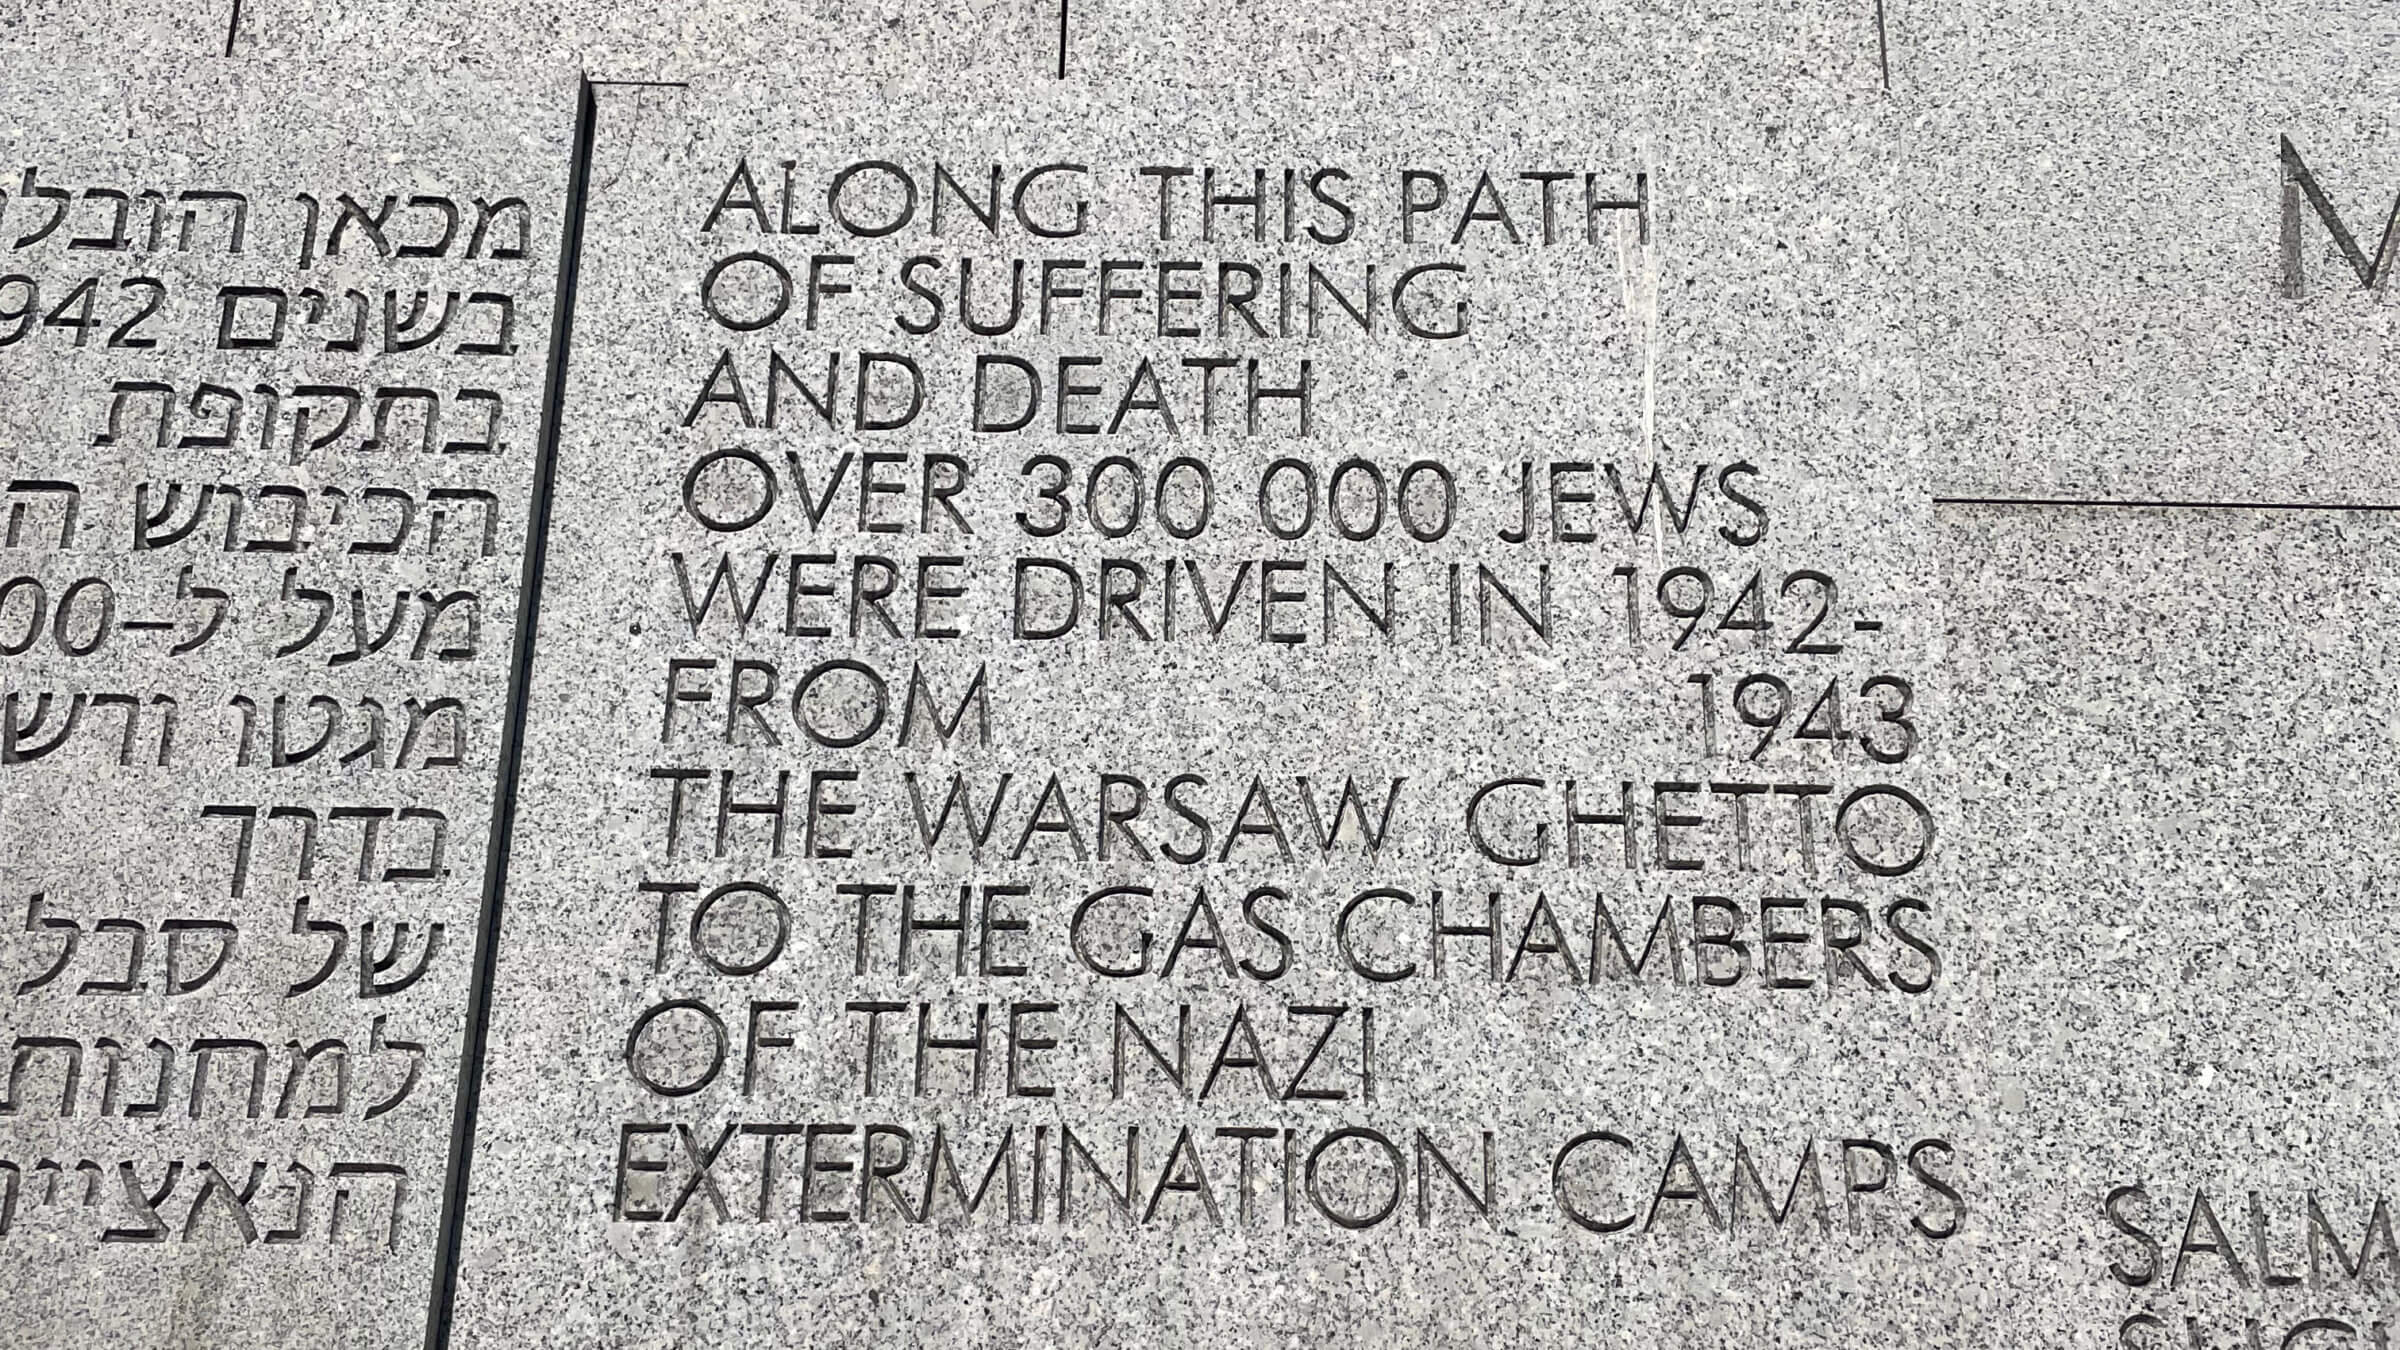 An inscription at the Umschlagplatz, the point near the Warsaw ghetto from which 300,000 Jews were loaded onto trains bound for death camps.